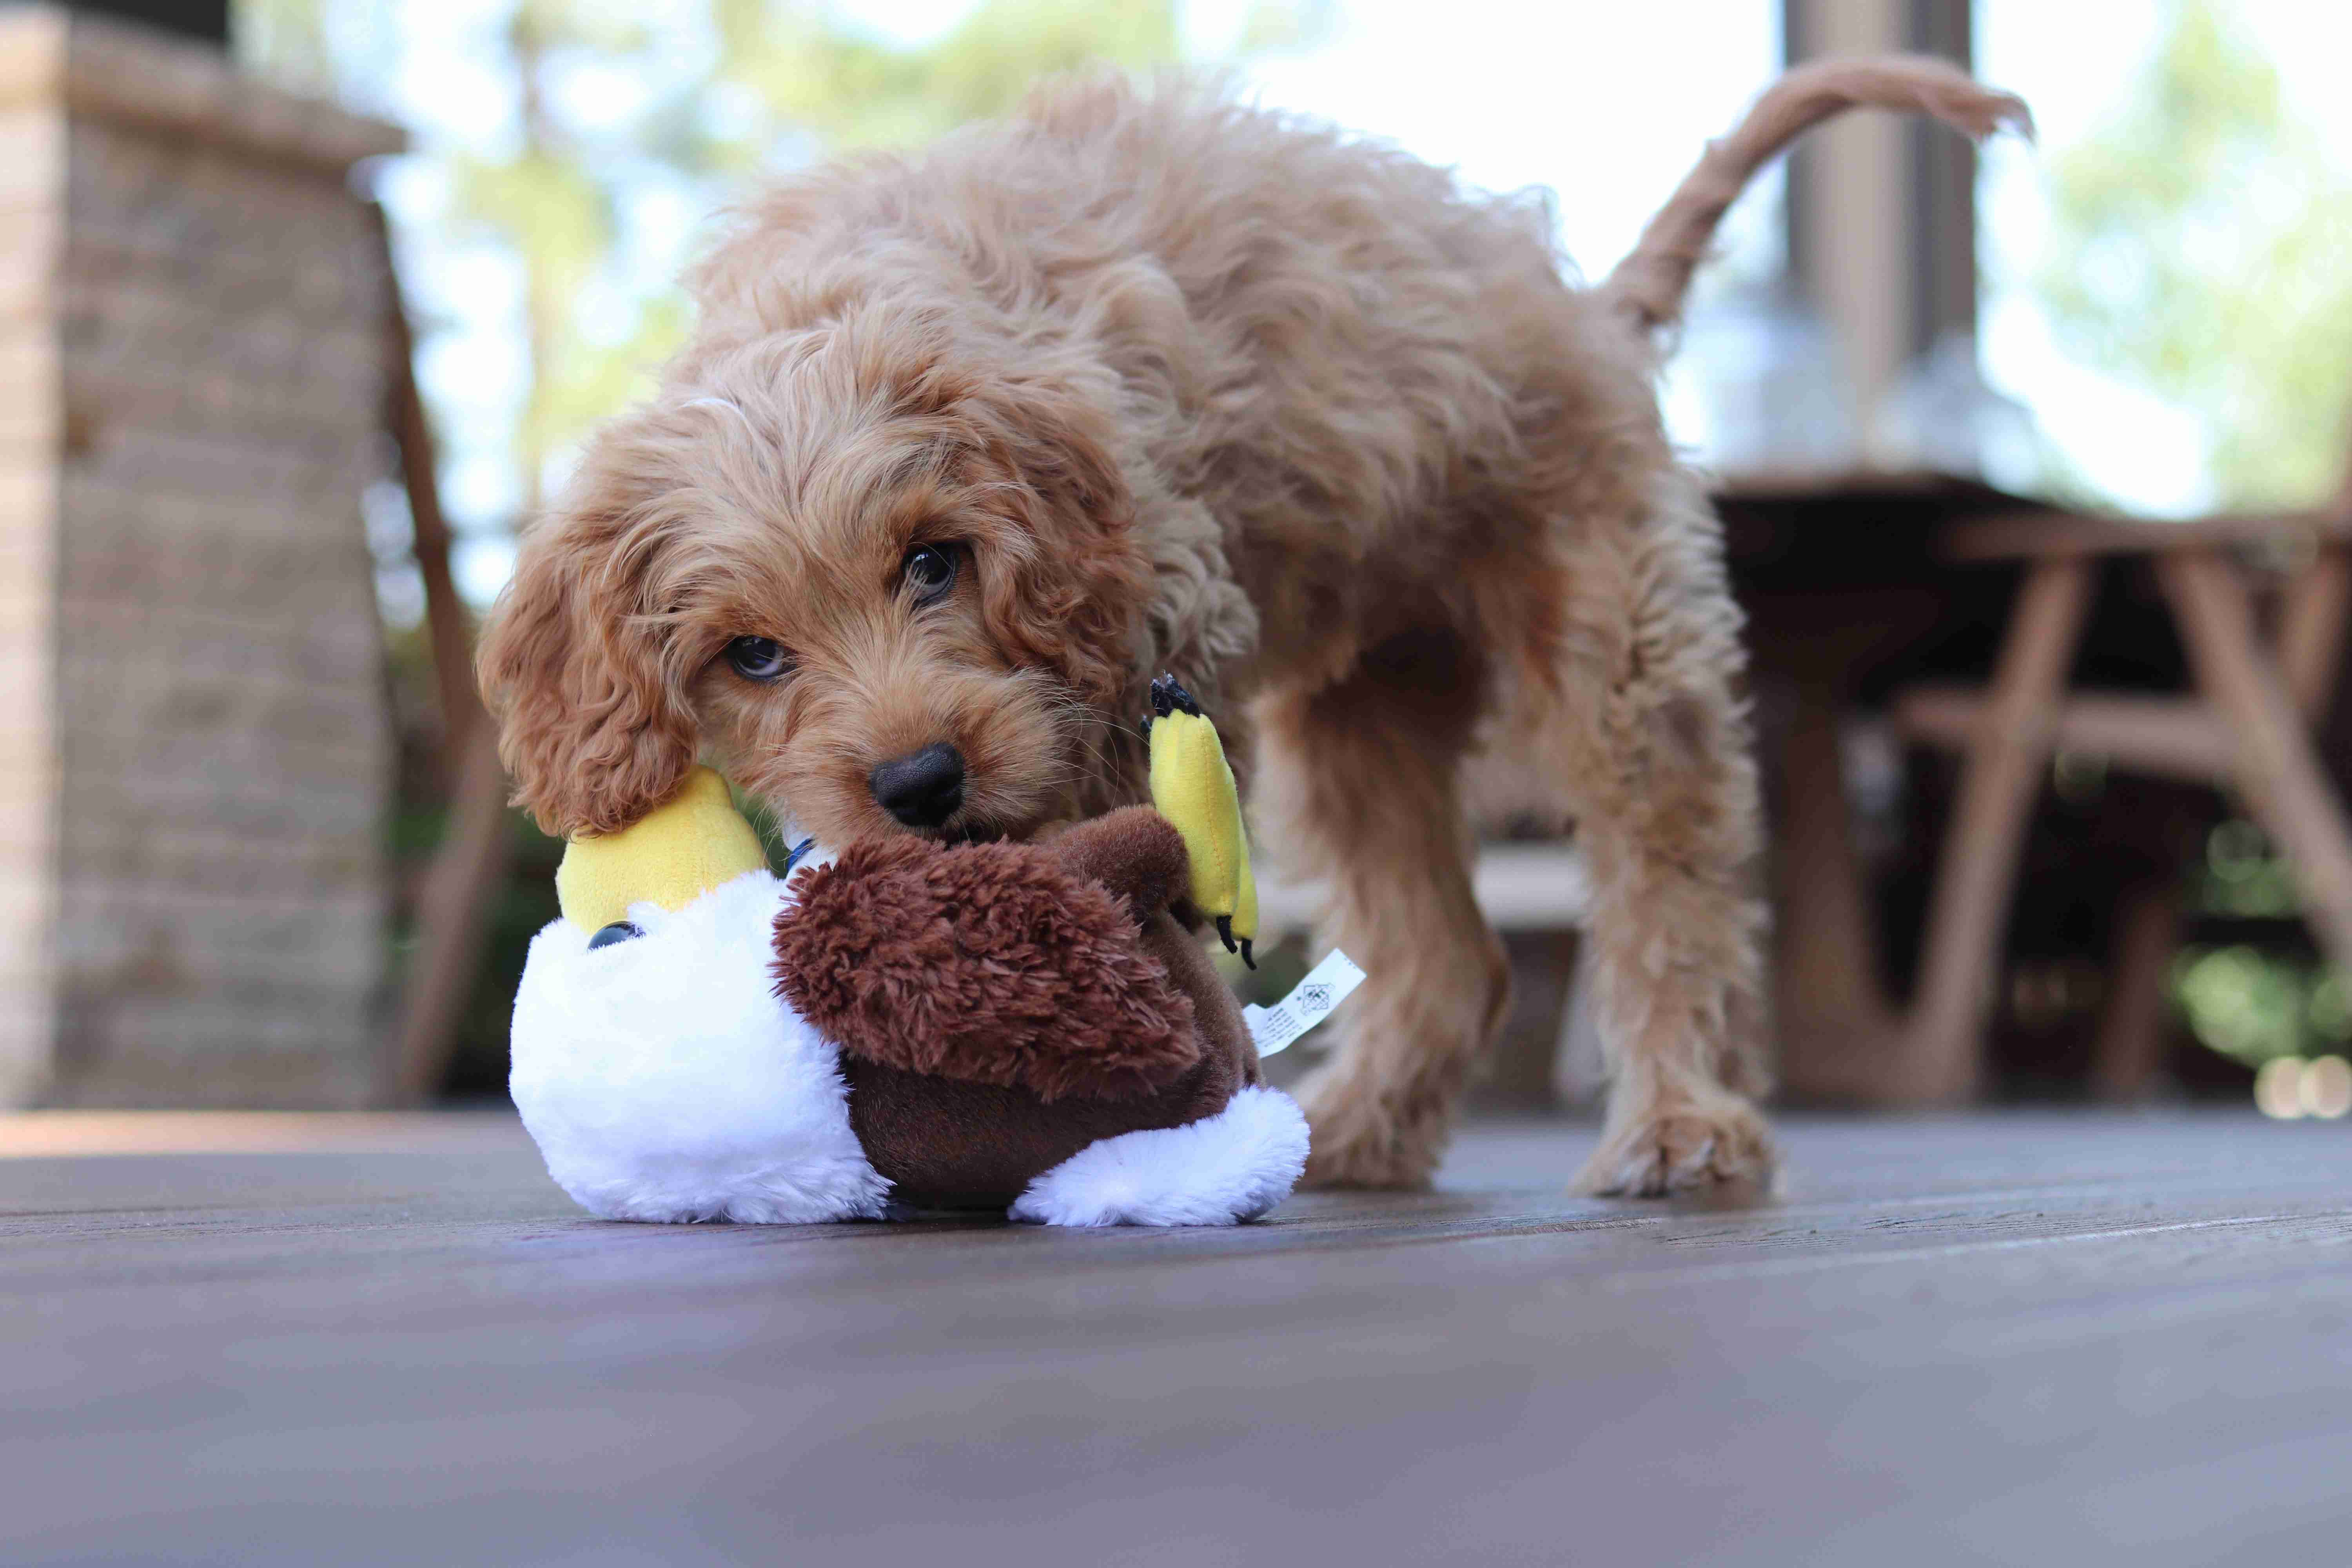 Did you encounter any difficulties with teaching your Poodle puppy to come when called?